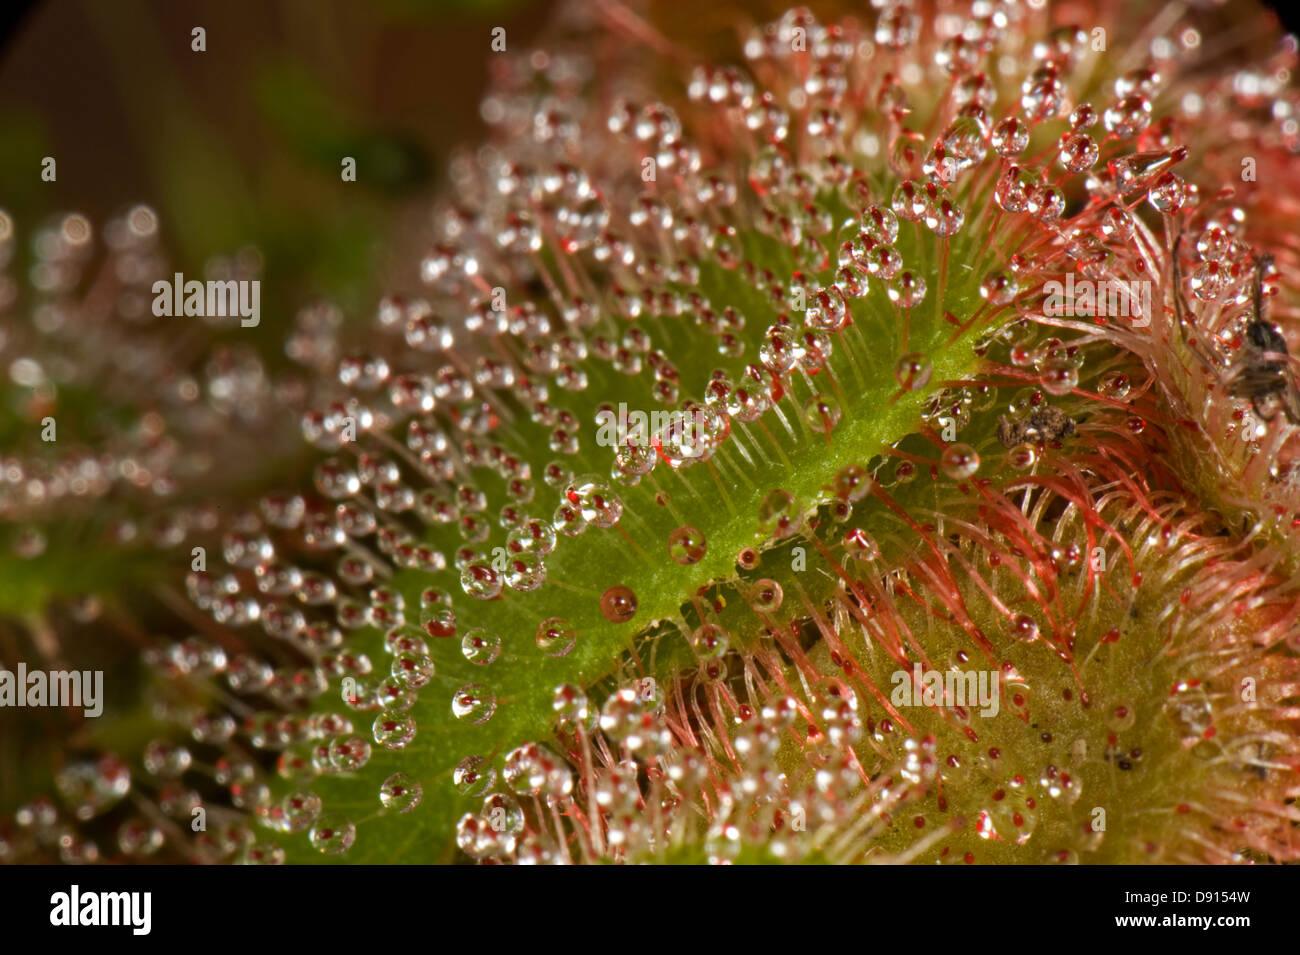 Insectivorous leaves and sticky leaf hairs of a sundew, Drosera aliciae, Stock Photo